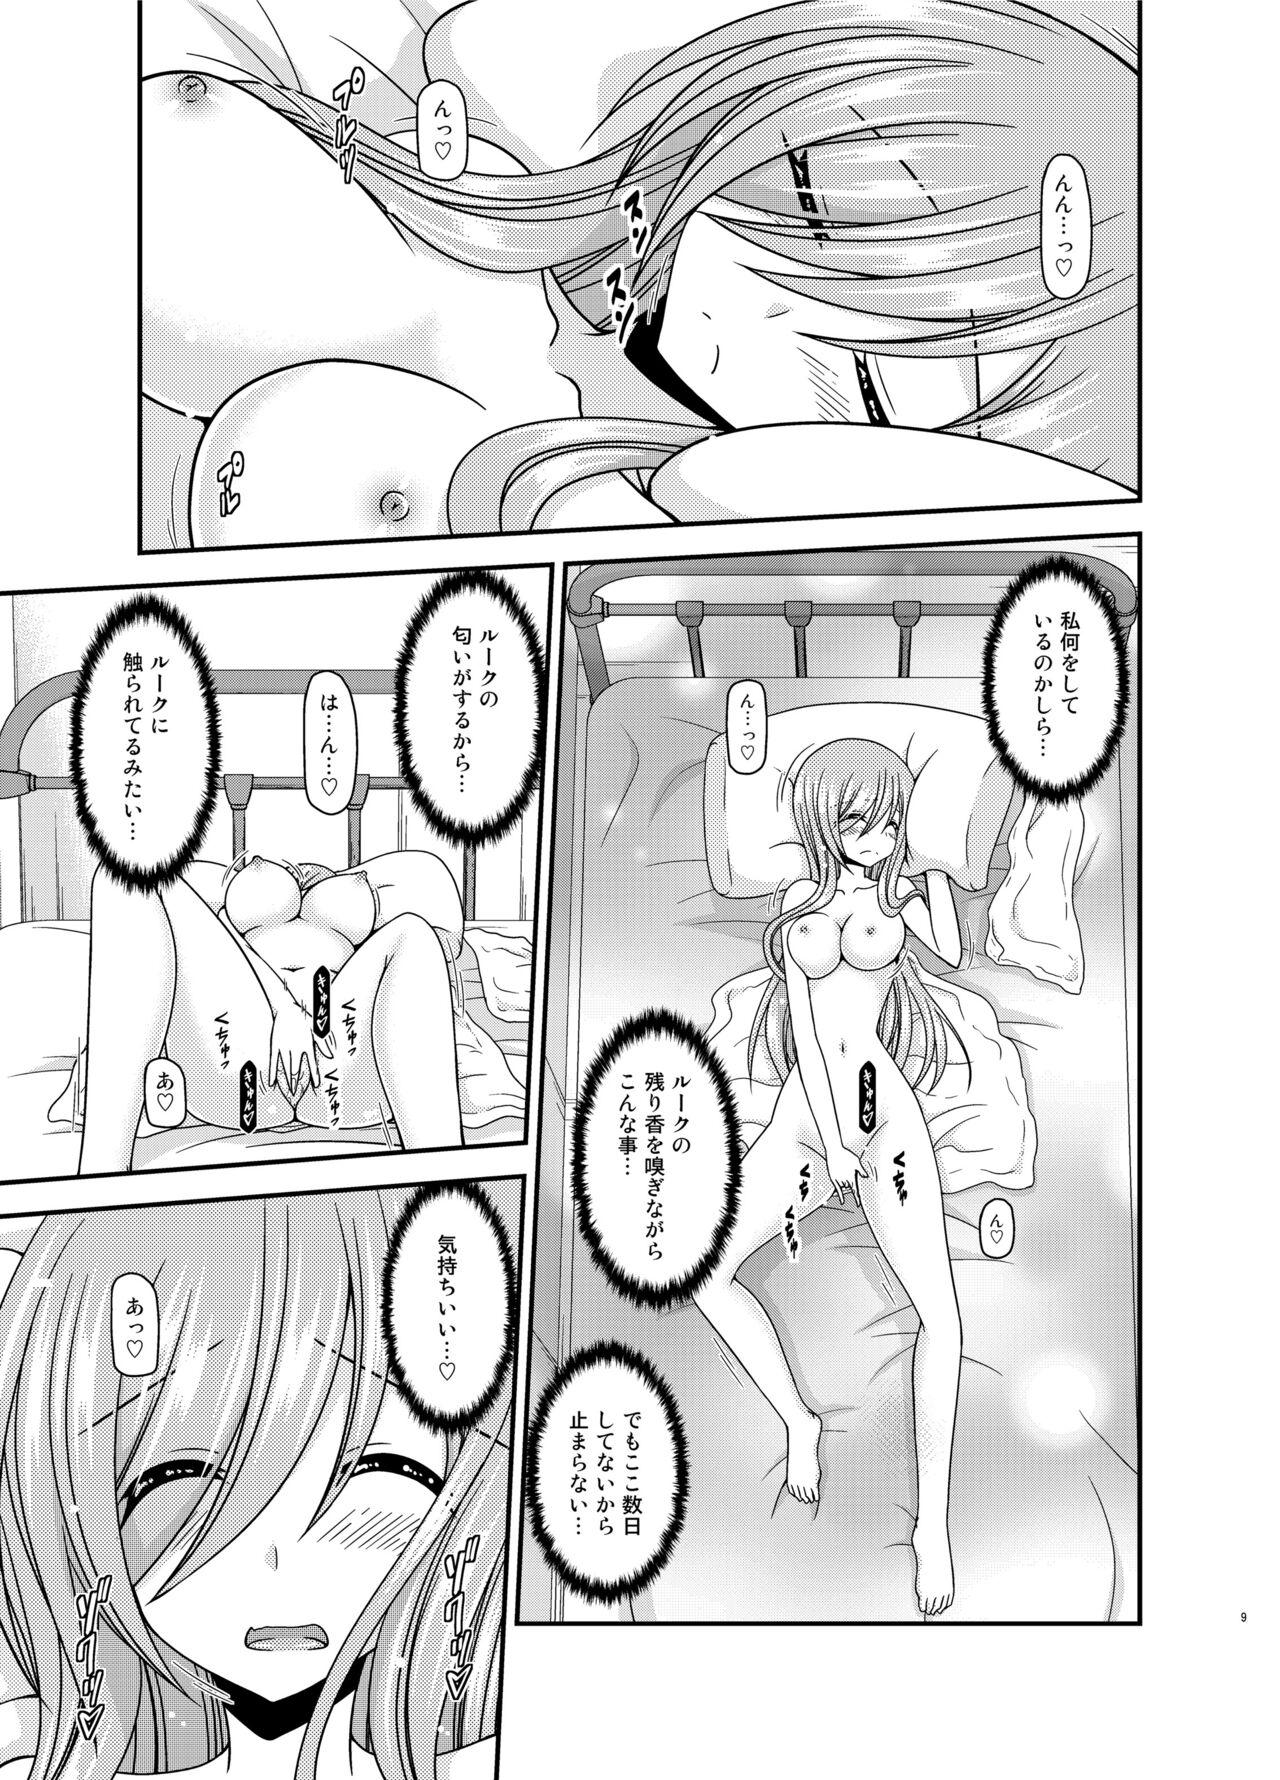 Dirty Talk Melon ga Chou Shindou! R15 - Tales of the abyss Vaginal - Page 9